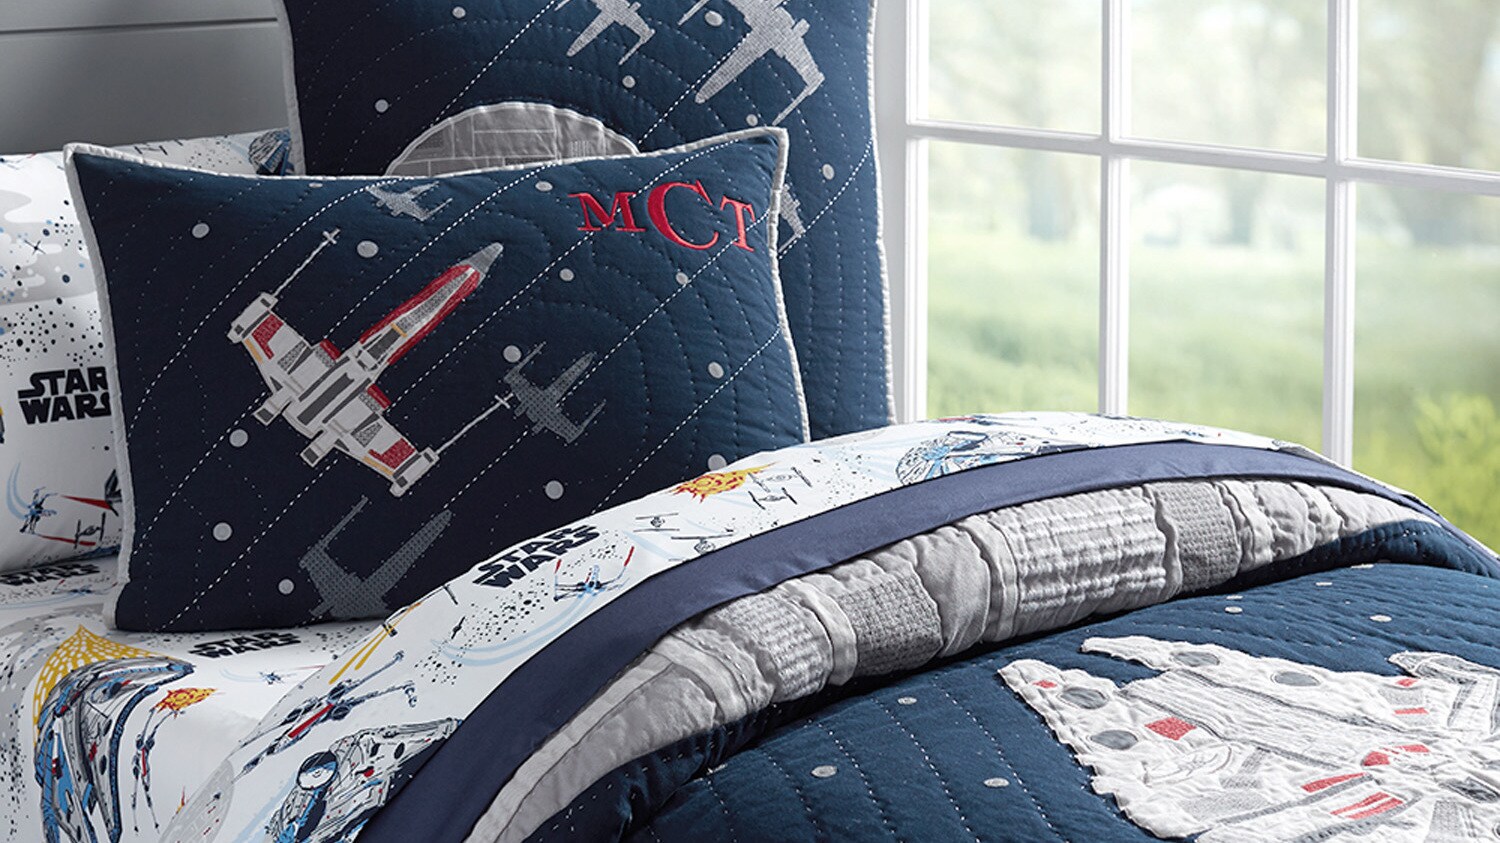 Pottery Barn Millennium Falcon quilted bedding